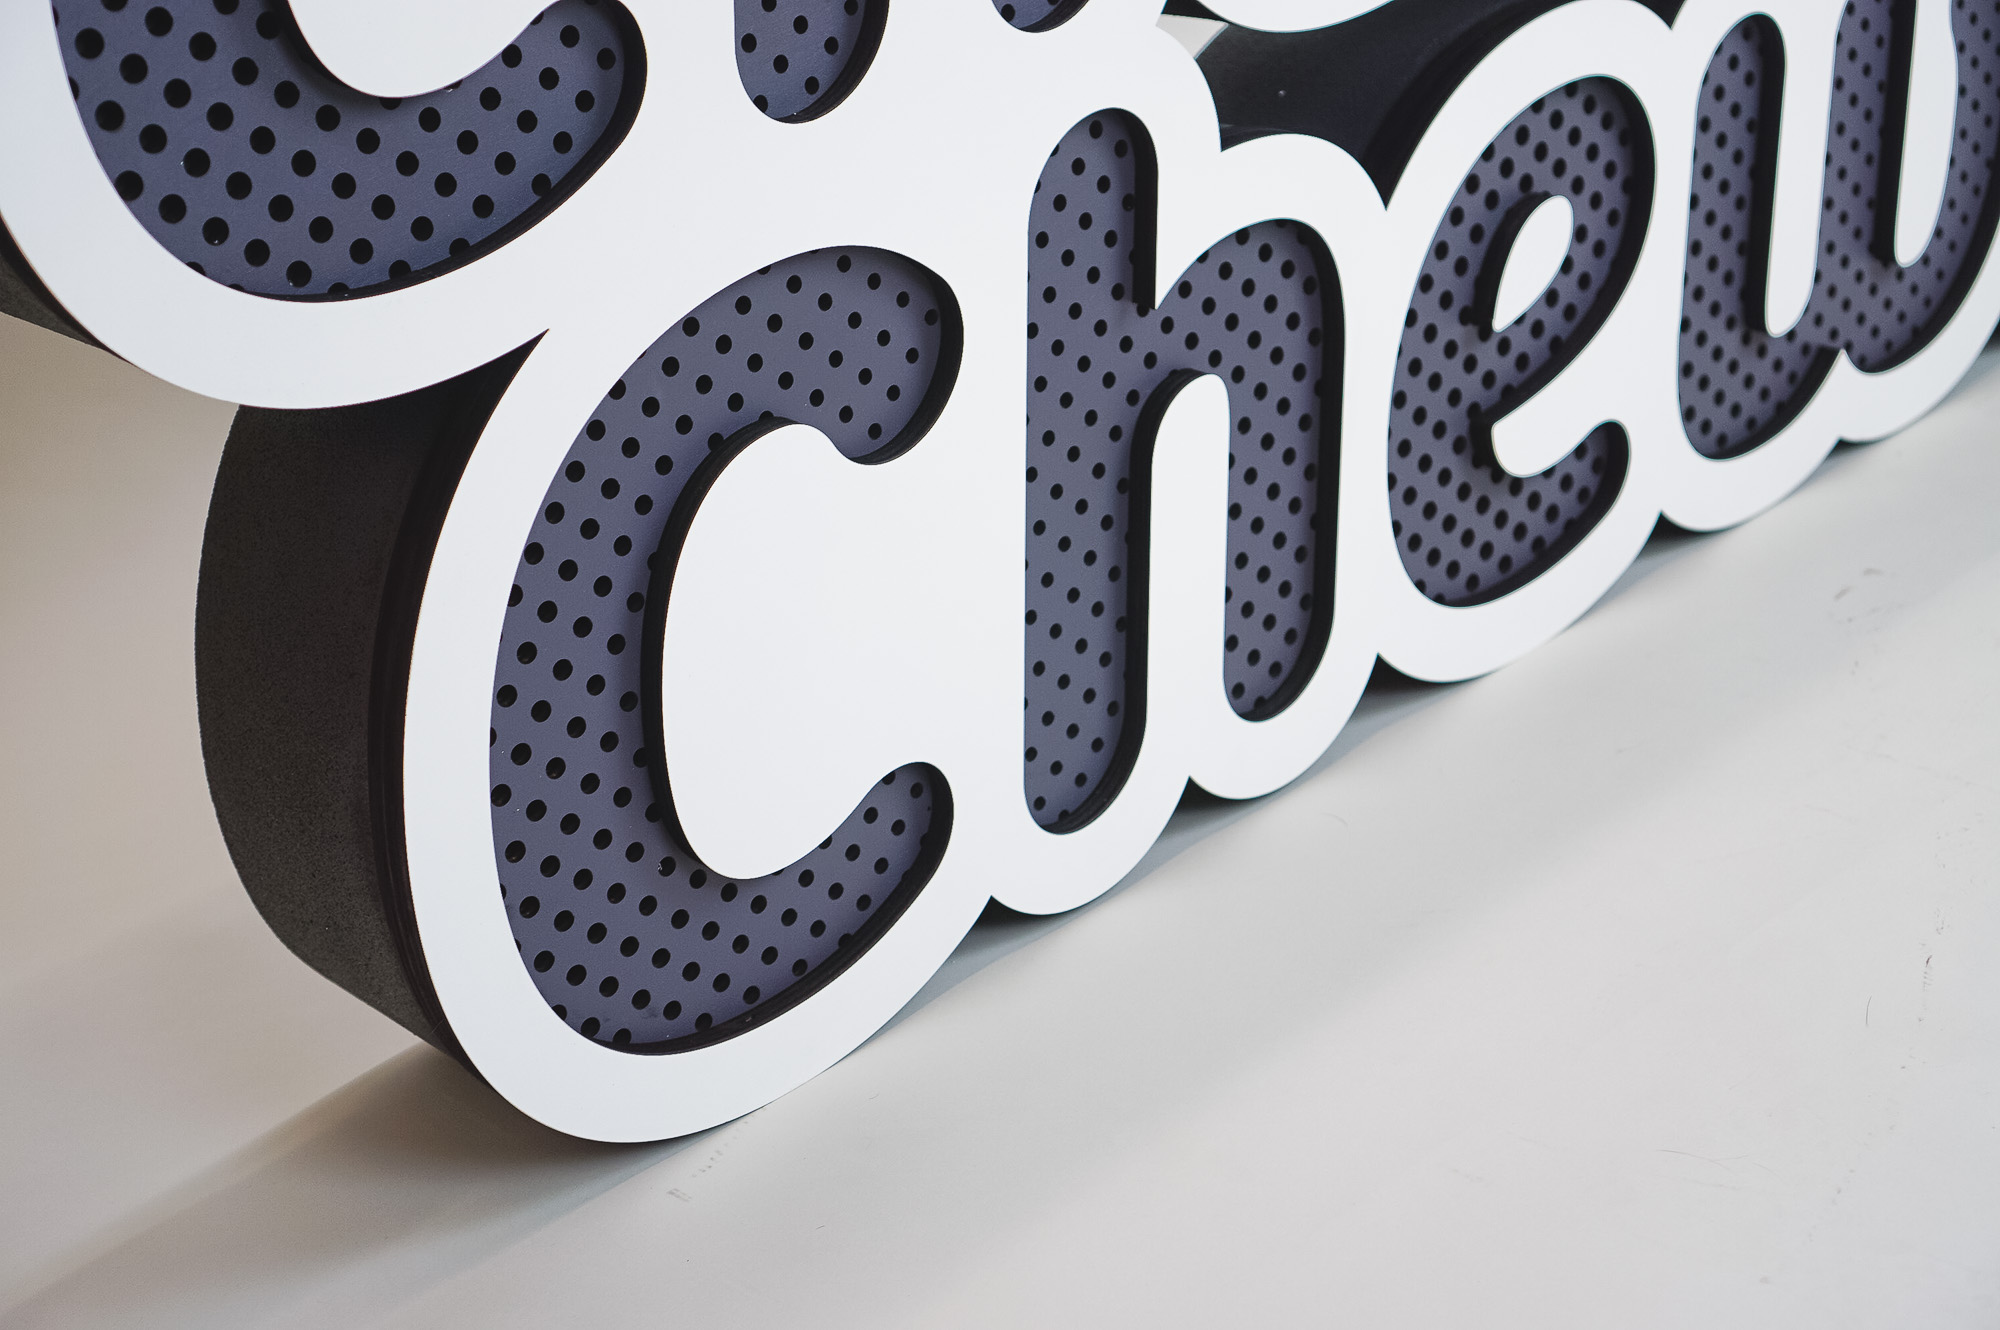 Dimensional large grey and white freestanding tradeshow floor sign for Cheeba Chews, makers of cannabis-infused edibles.